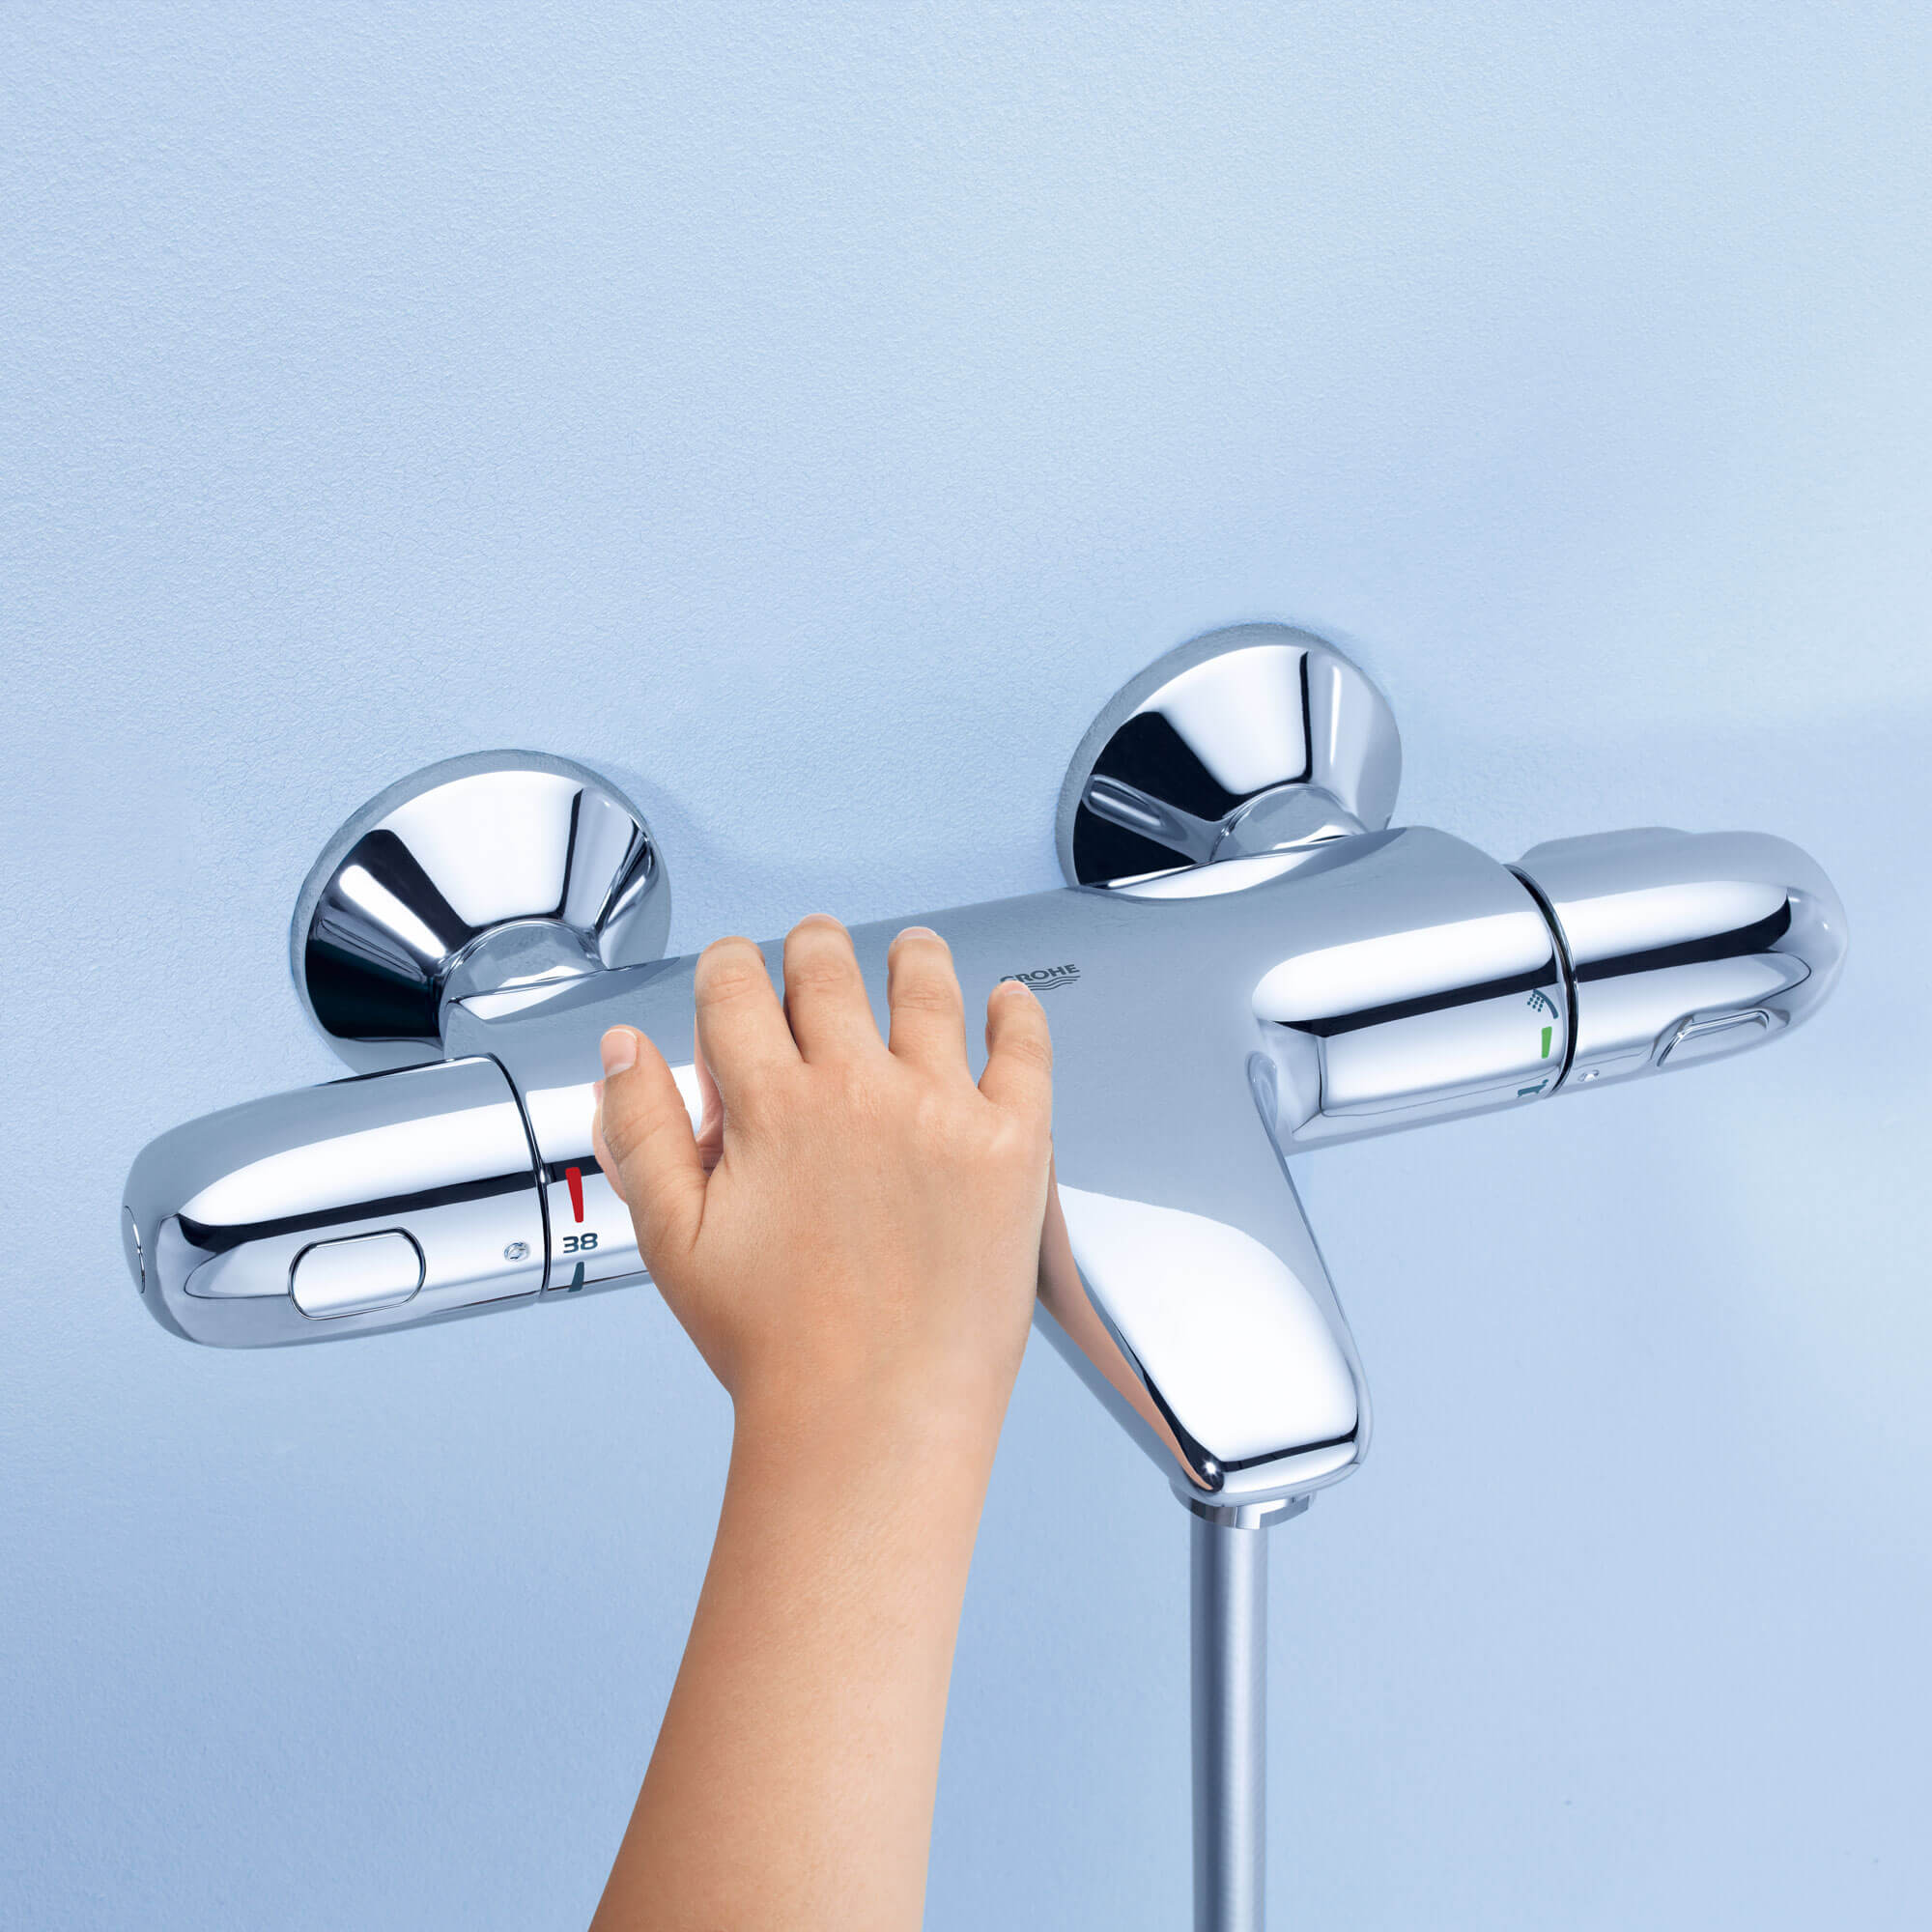 A child's hand reaching for a thermostatic knob.